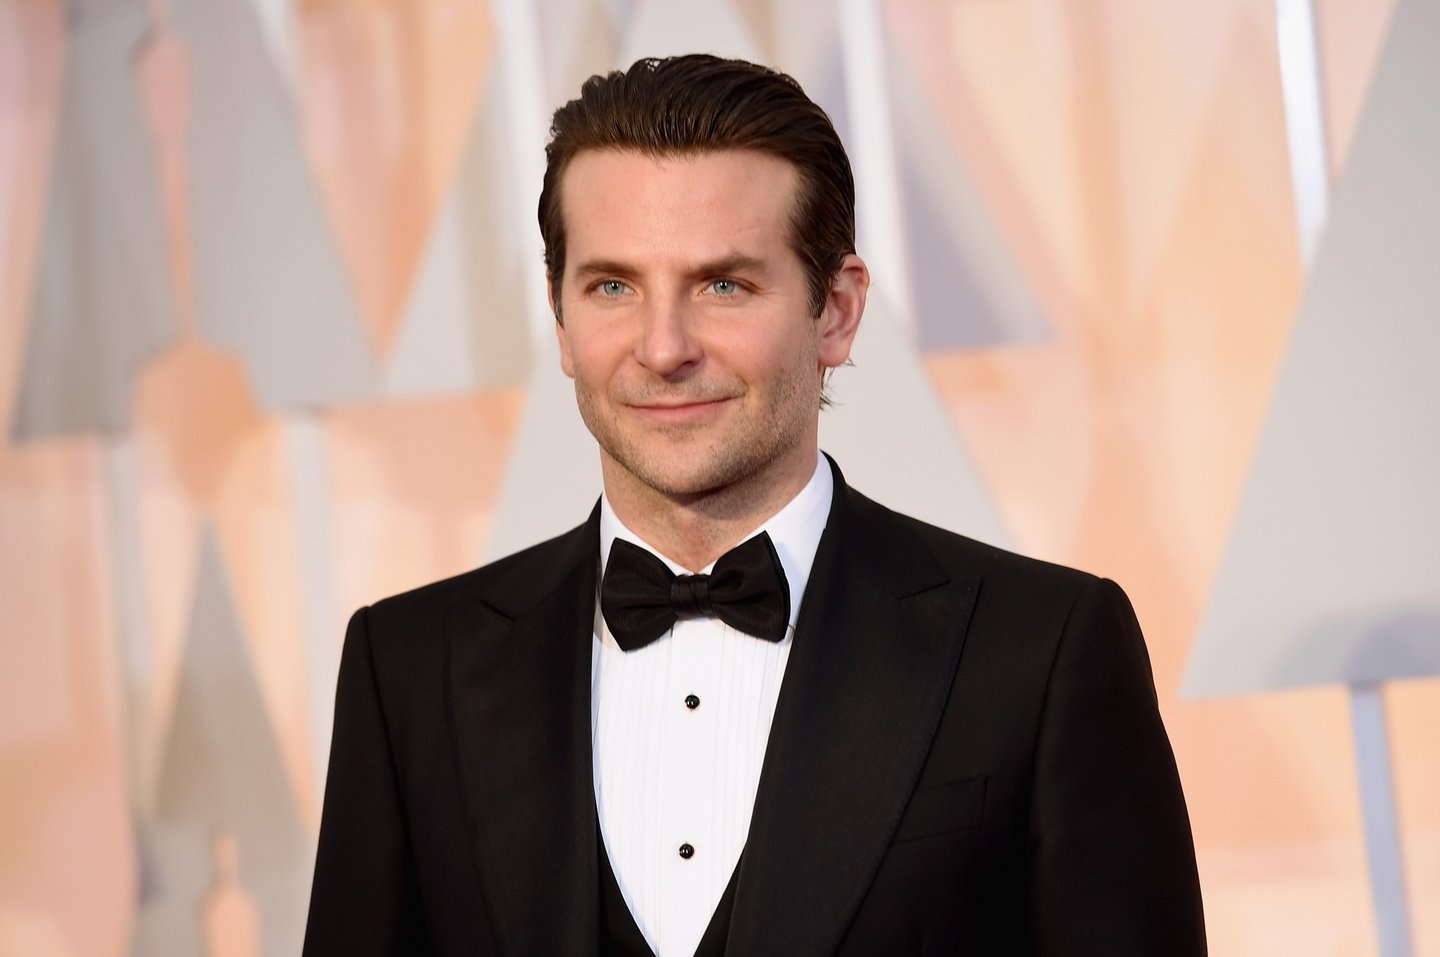 HOLLYWOOD, CA - FEBRUARY 22: Actor Bradley Cooper attends the 87th Annual Academy Awards at Hollywood & Highland Center on February 22, 2015 in Hollywood, California. (Photo by Jason Merritt/Getty Images)